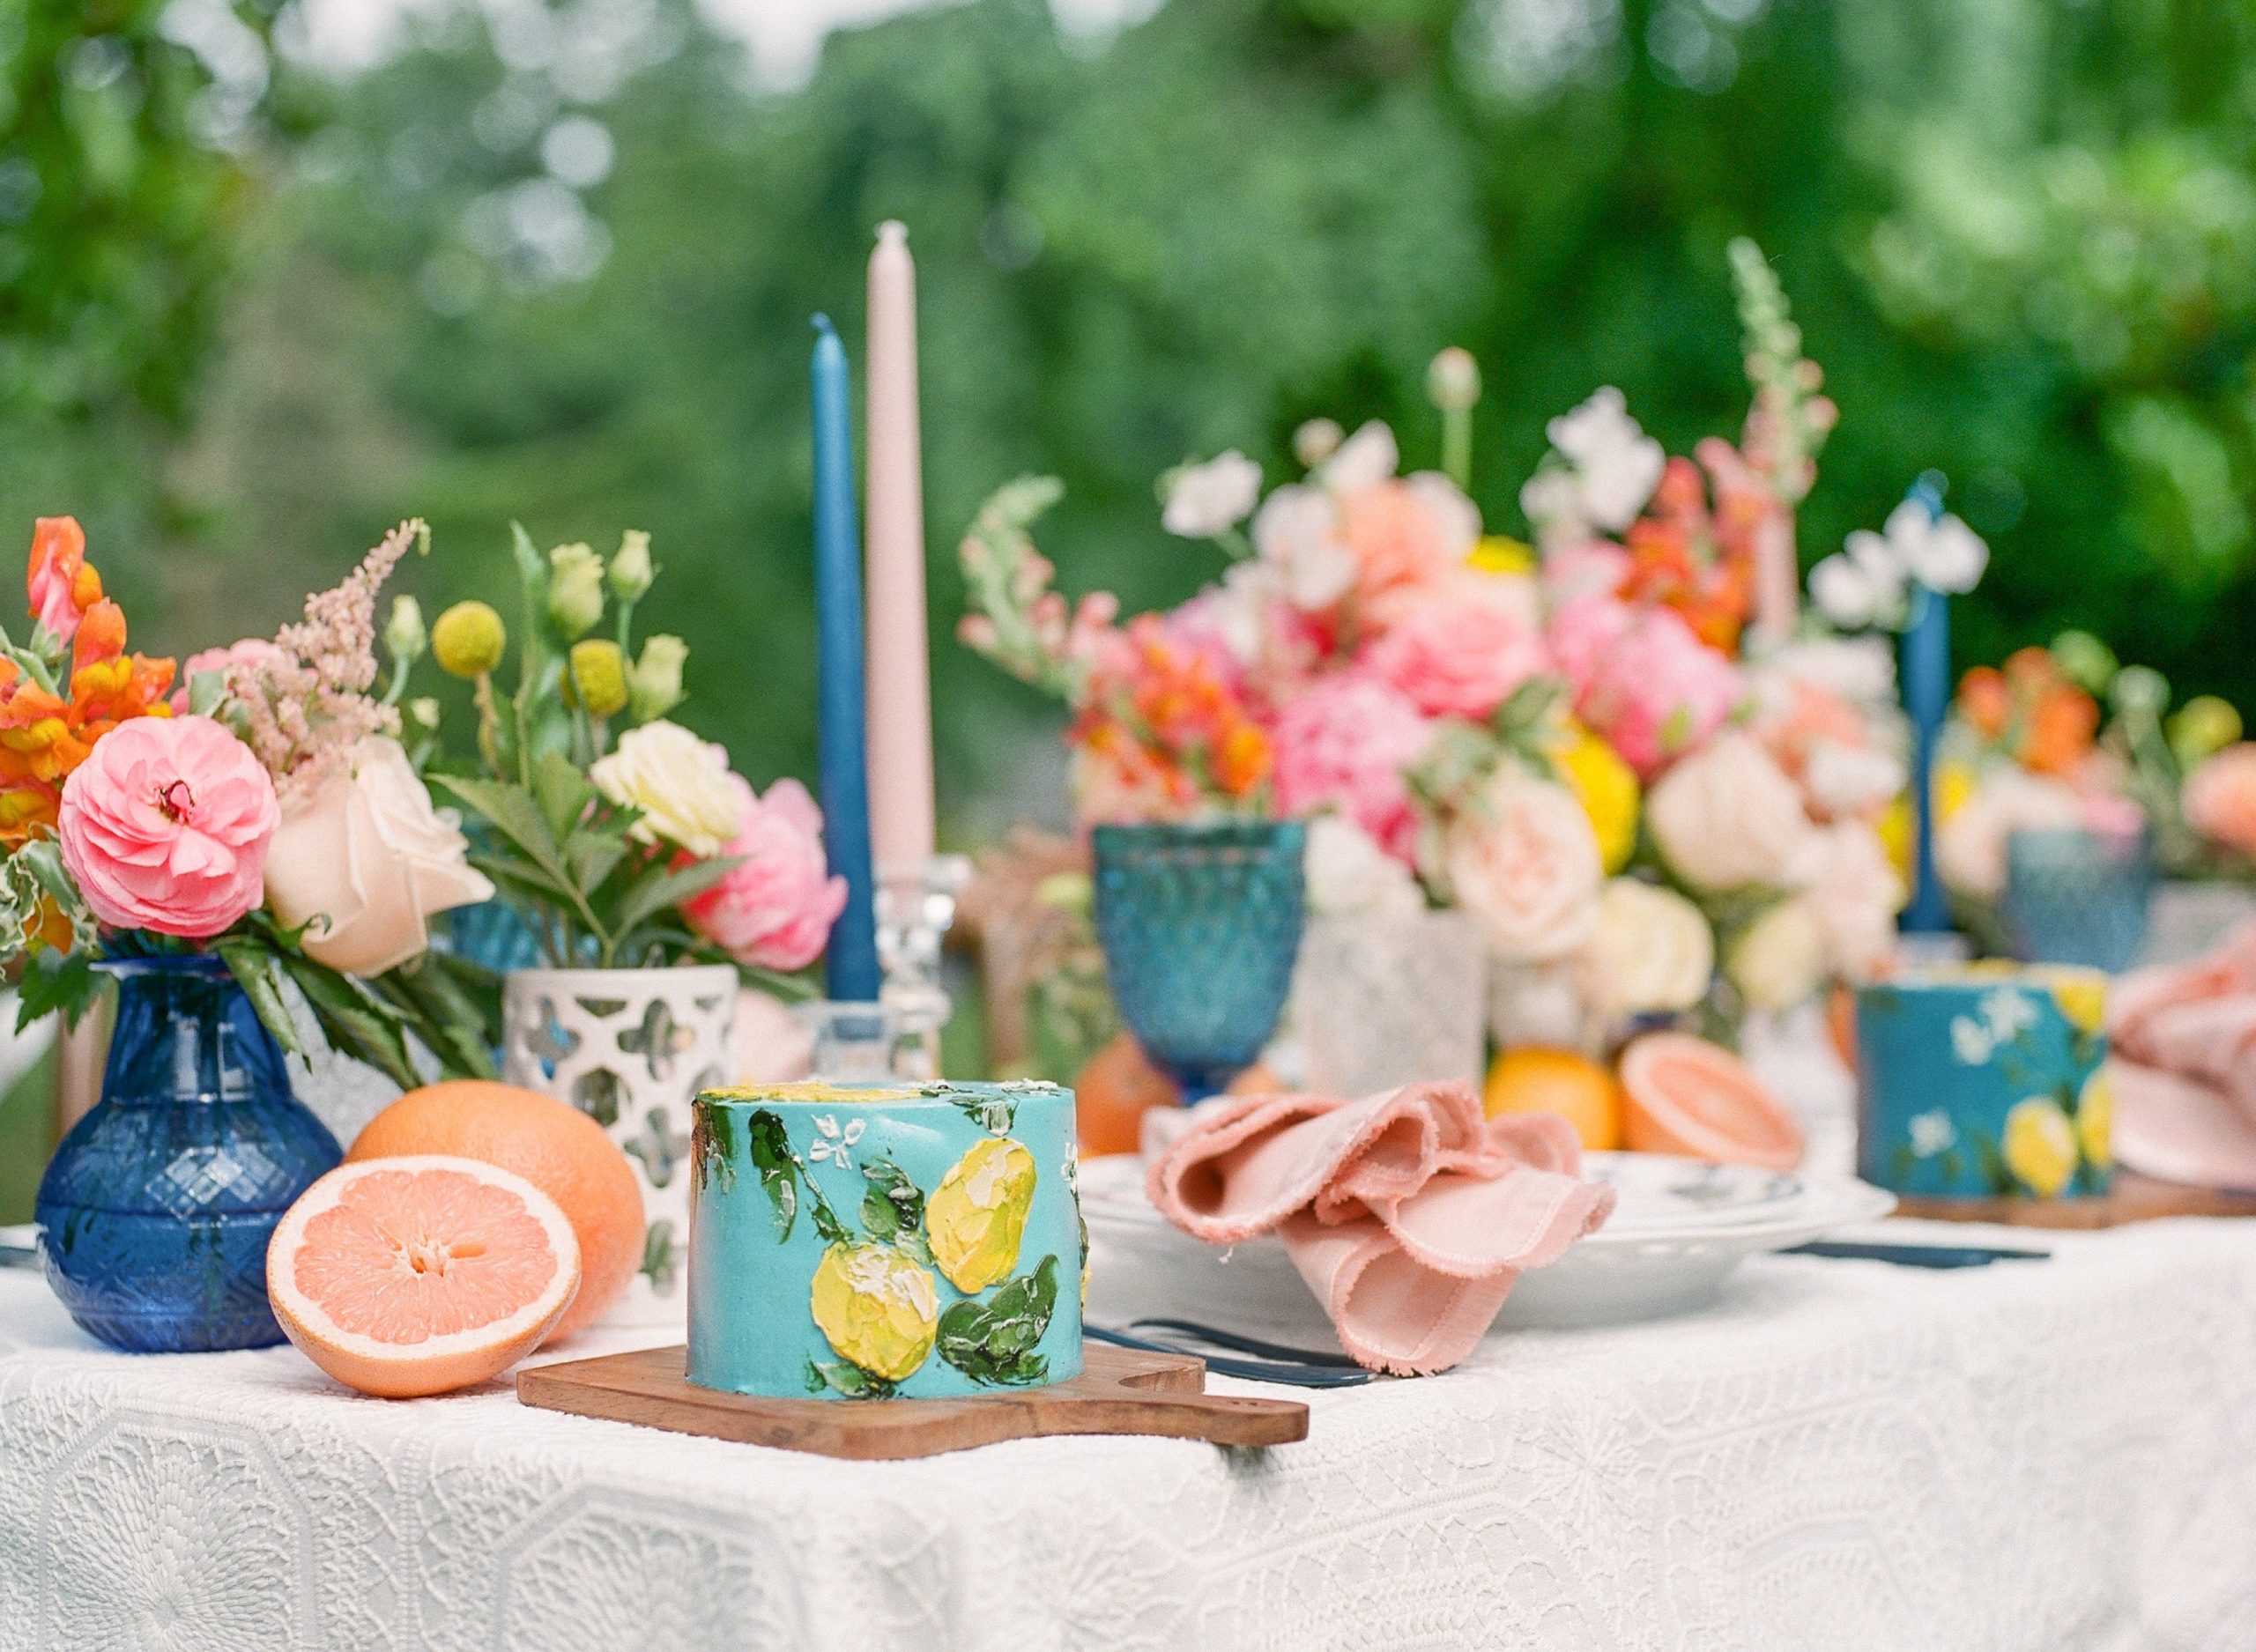 This citrus inspired wedding decor was photographed on film by Washington, DC wedding photographer, Alicia Lacey at a private residence.